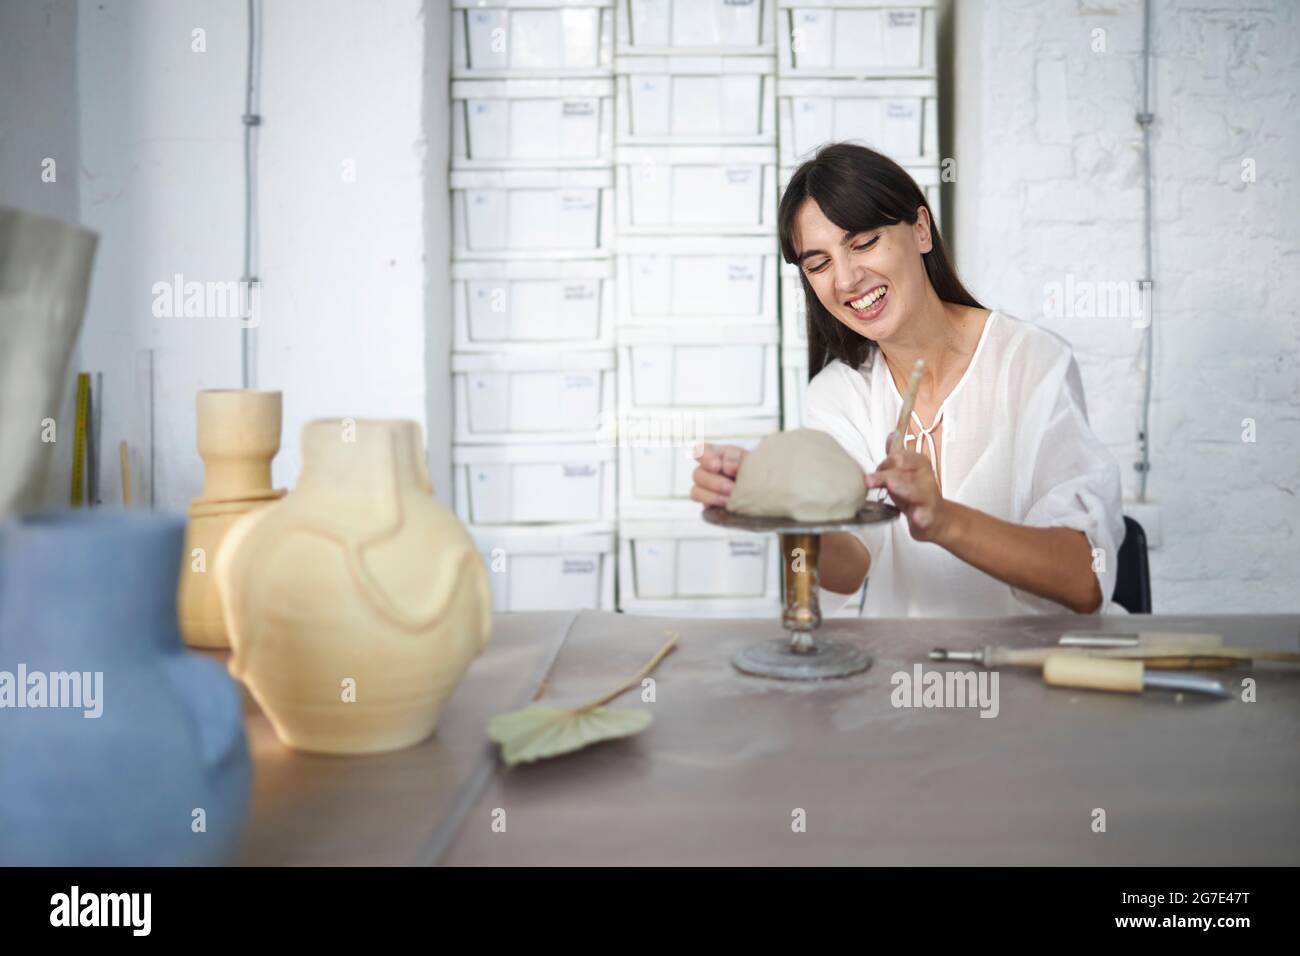 Woman laughing and enjoying her pottery class Stock Photo